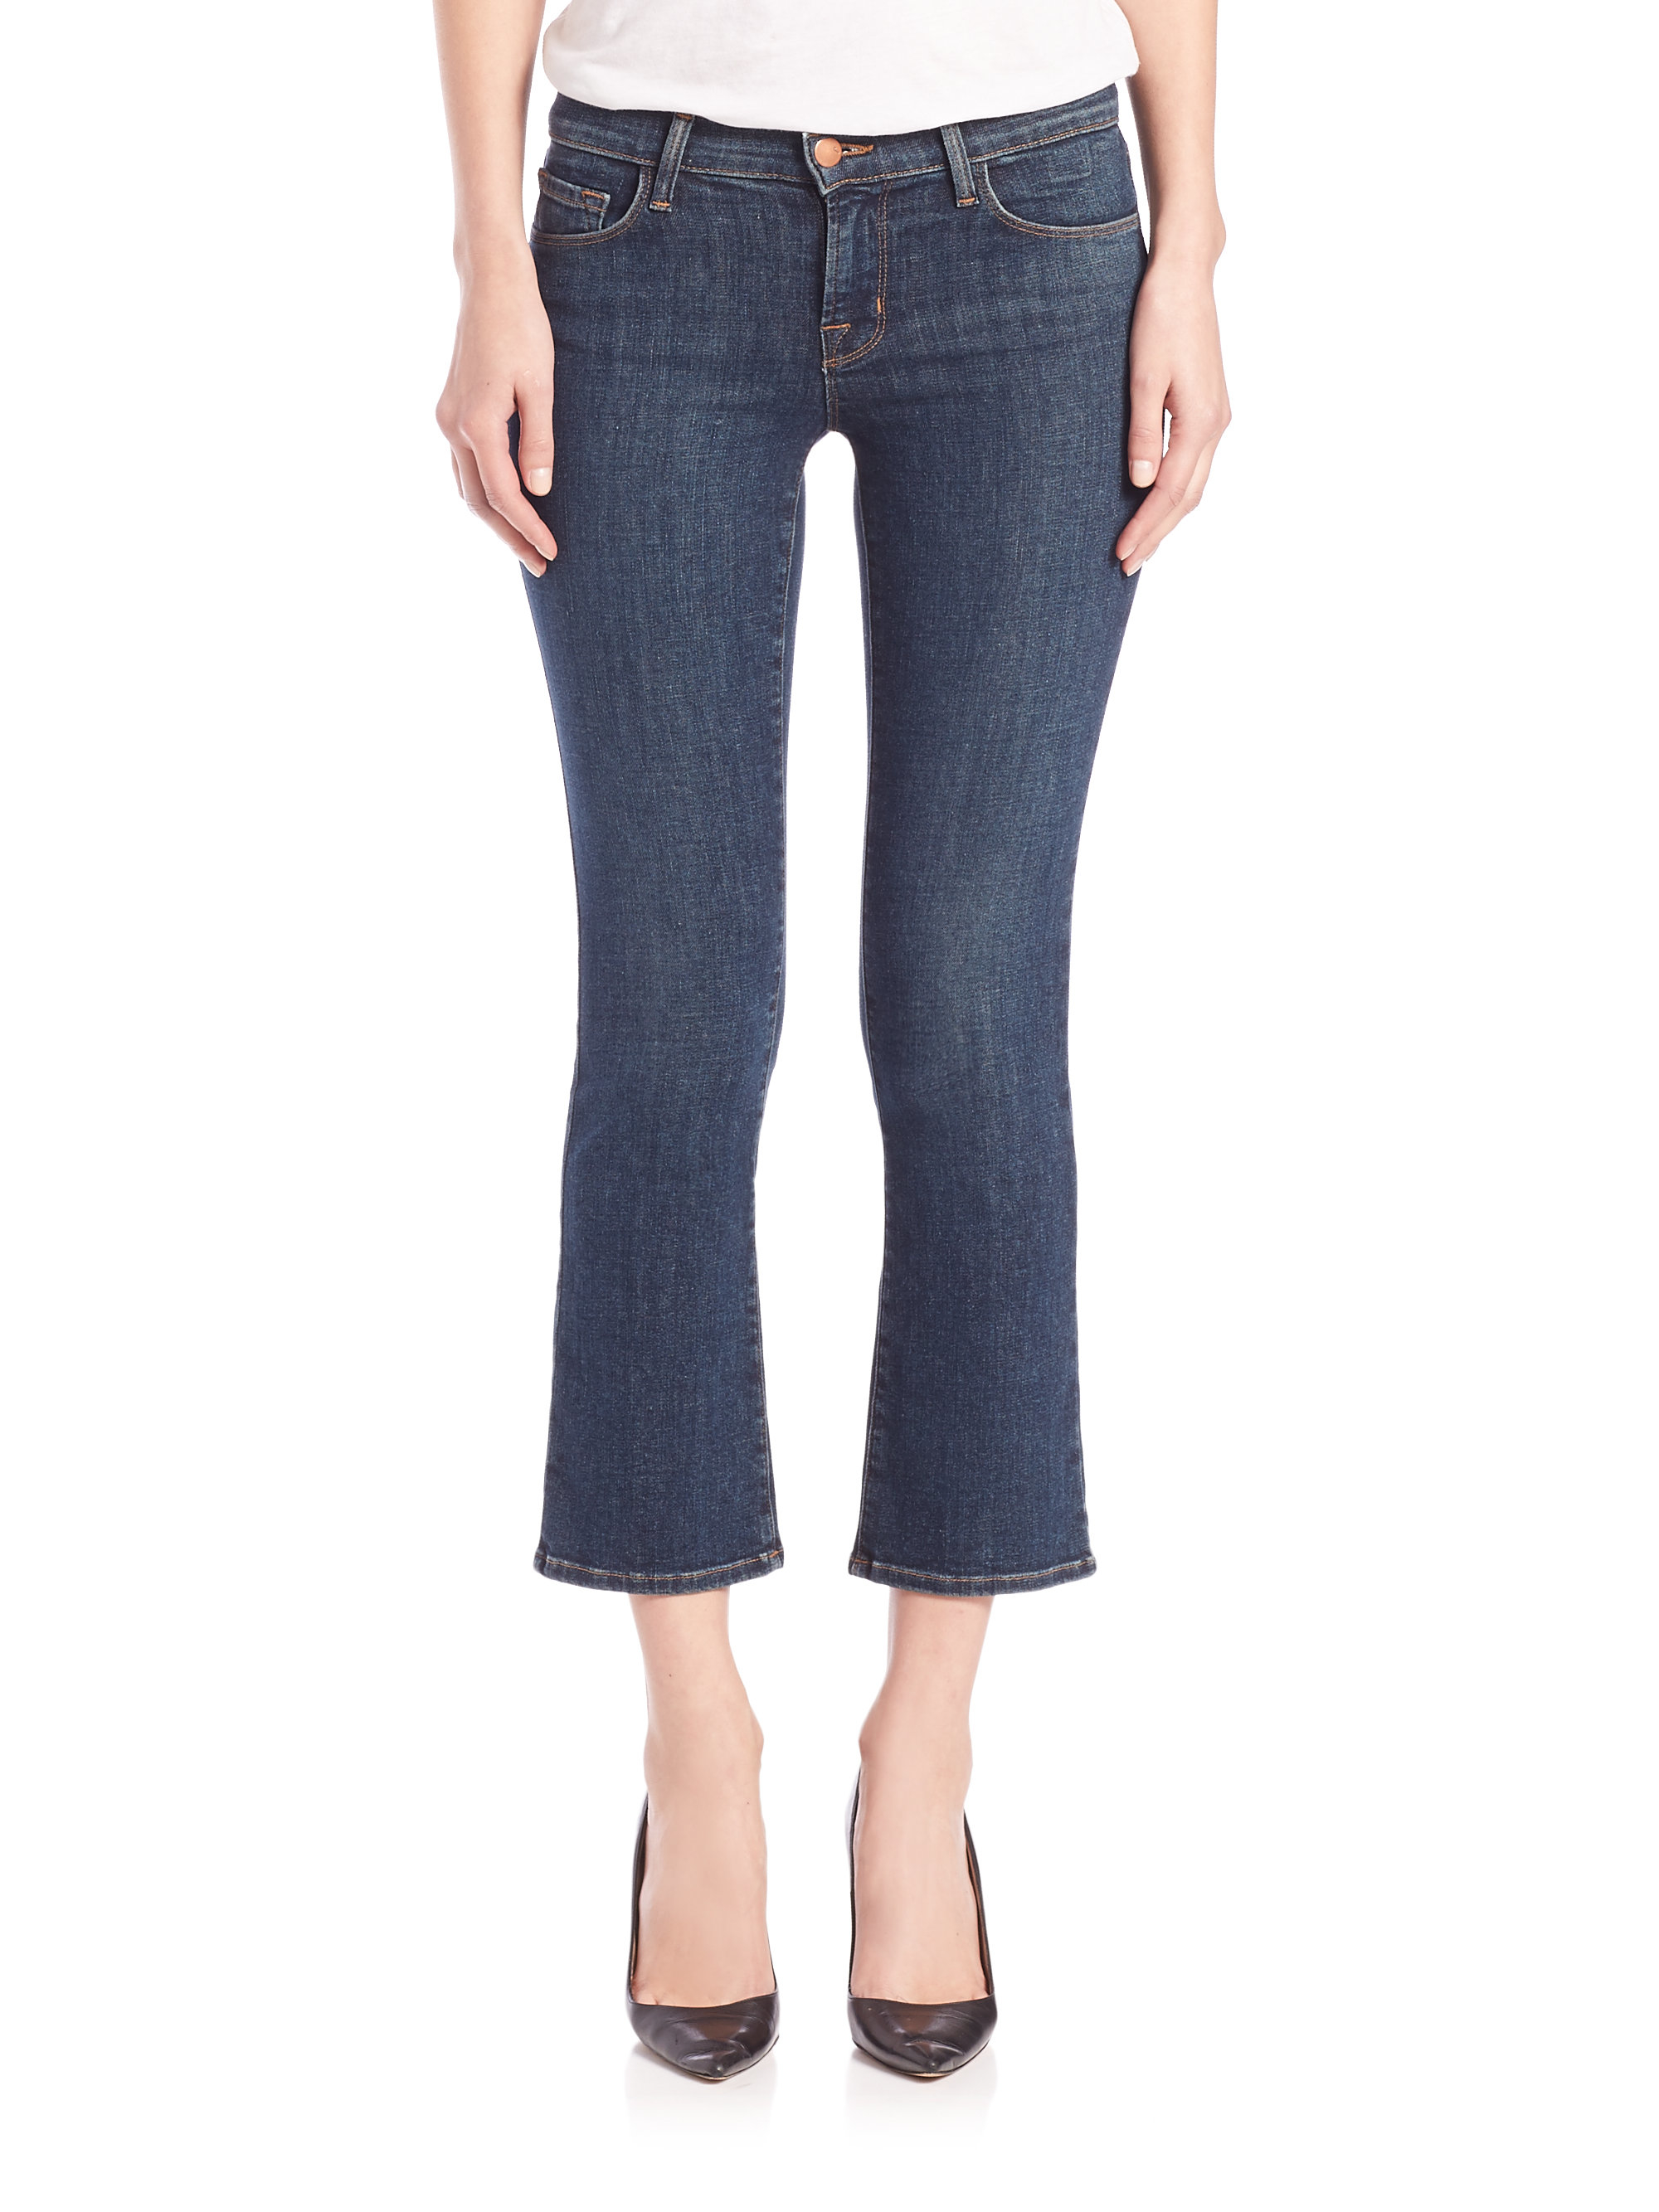 J Brand Selena Mid-rise Cropped Bootcut Jeans in Blue - Lyst